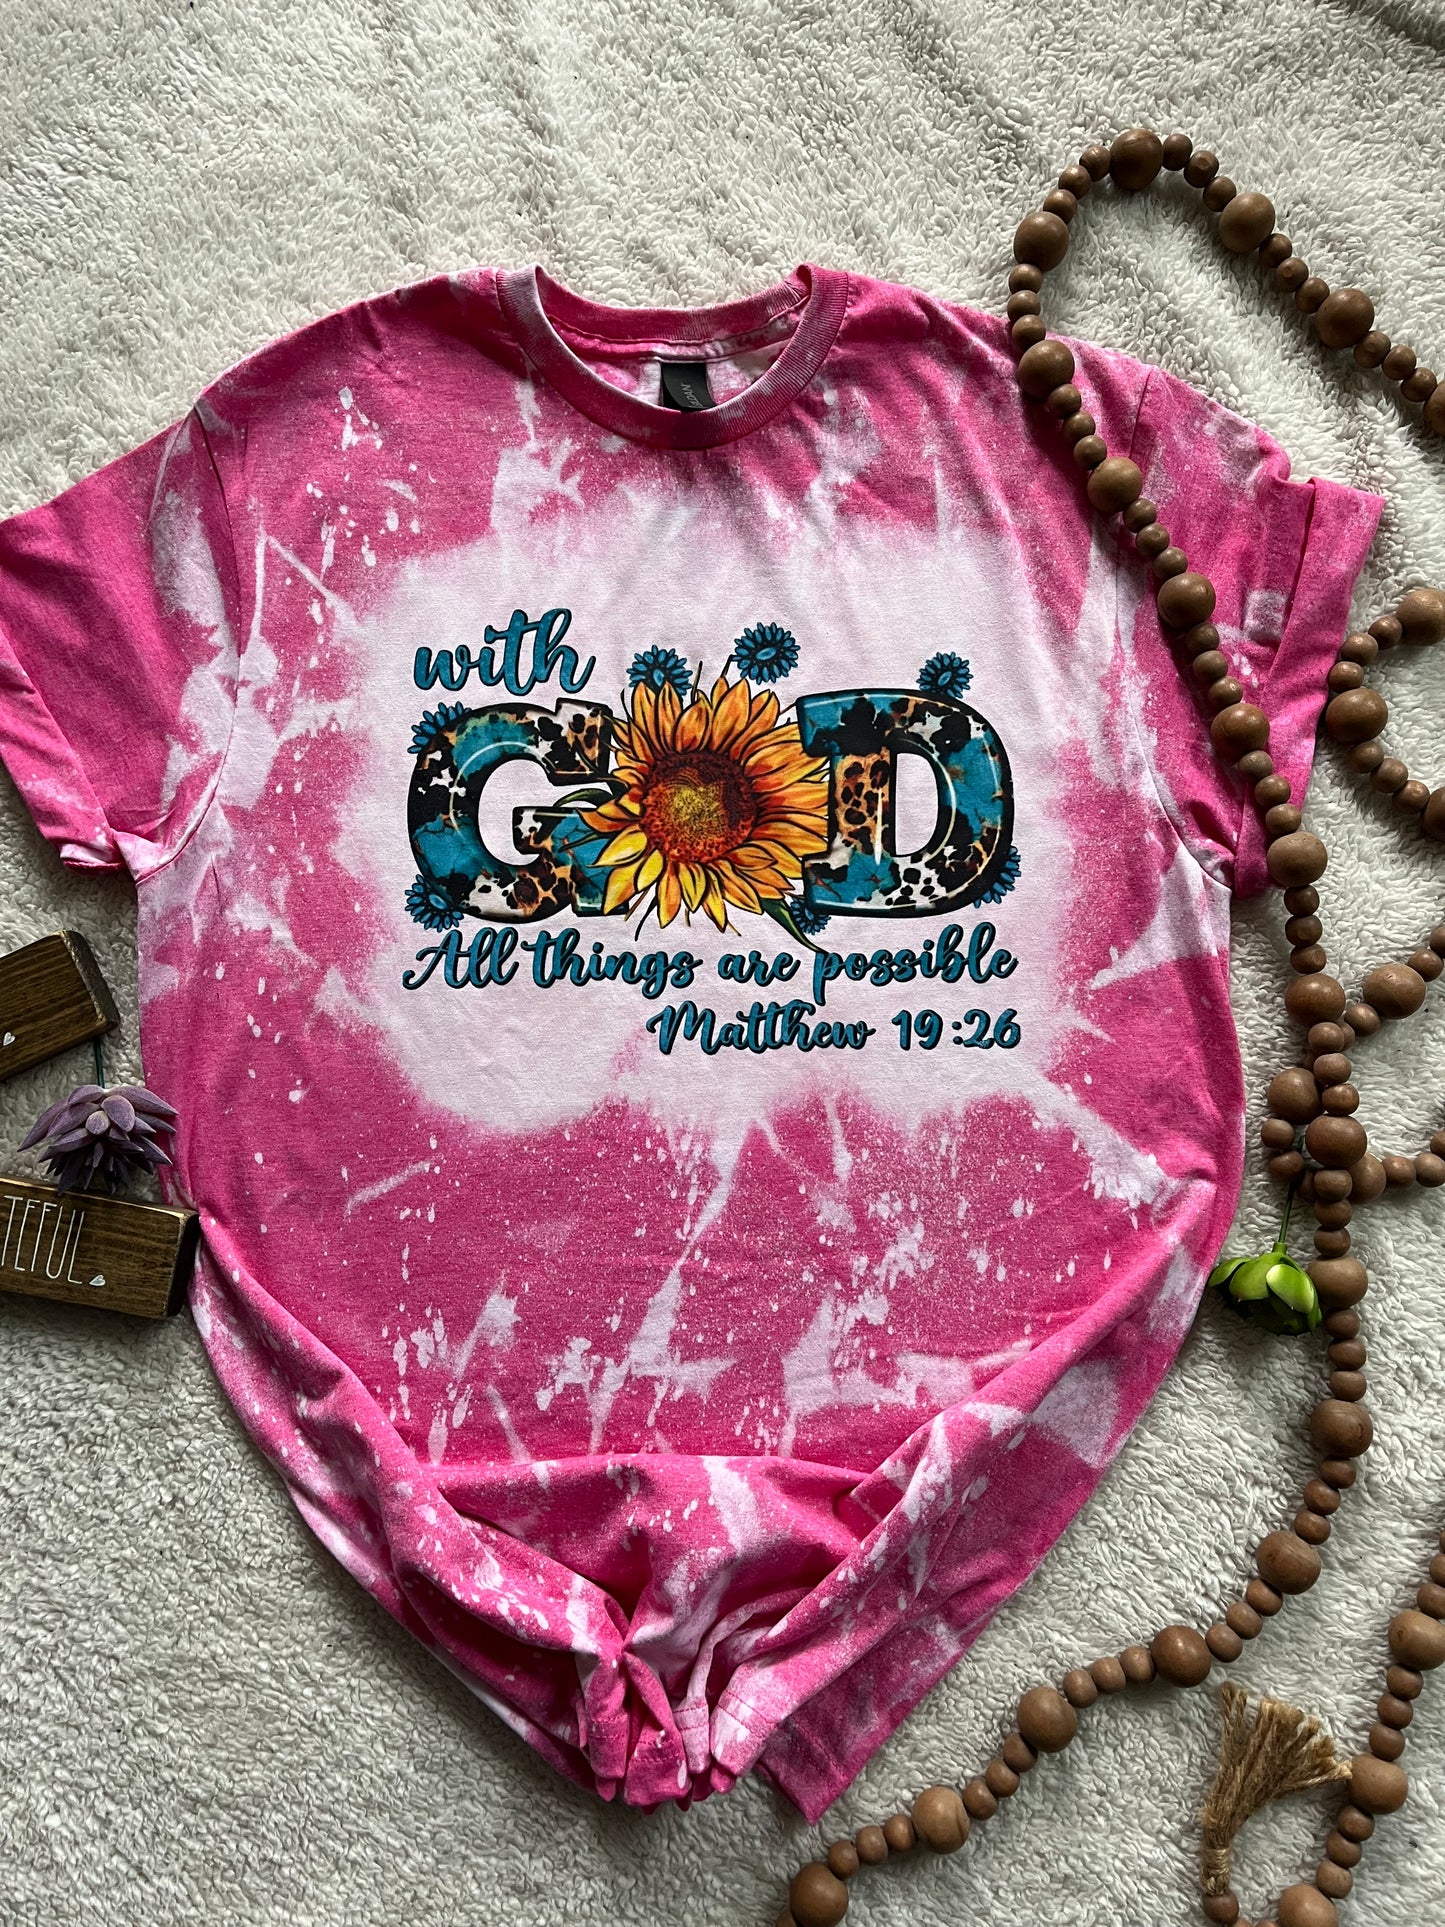 Western floral Faith T-shirt bleached tees With God all things are possible  pink sunflower shirt